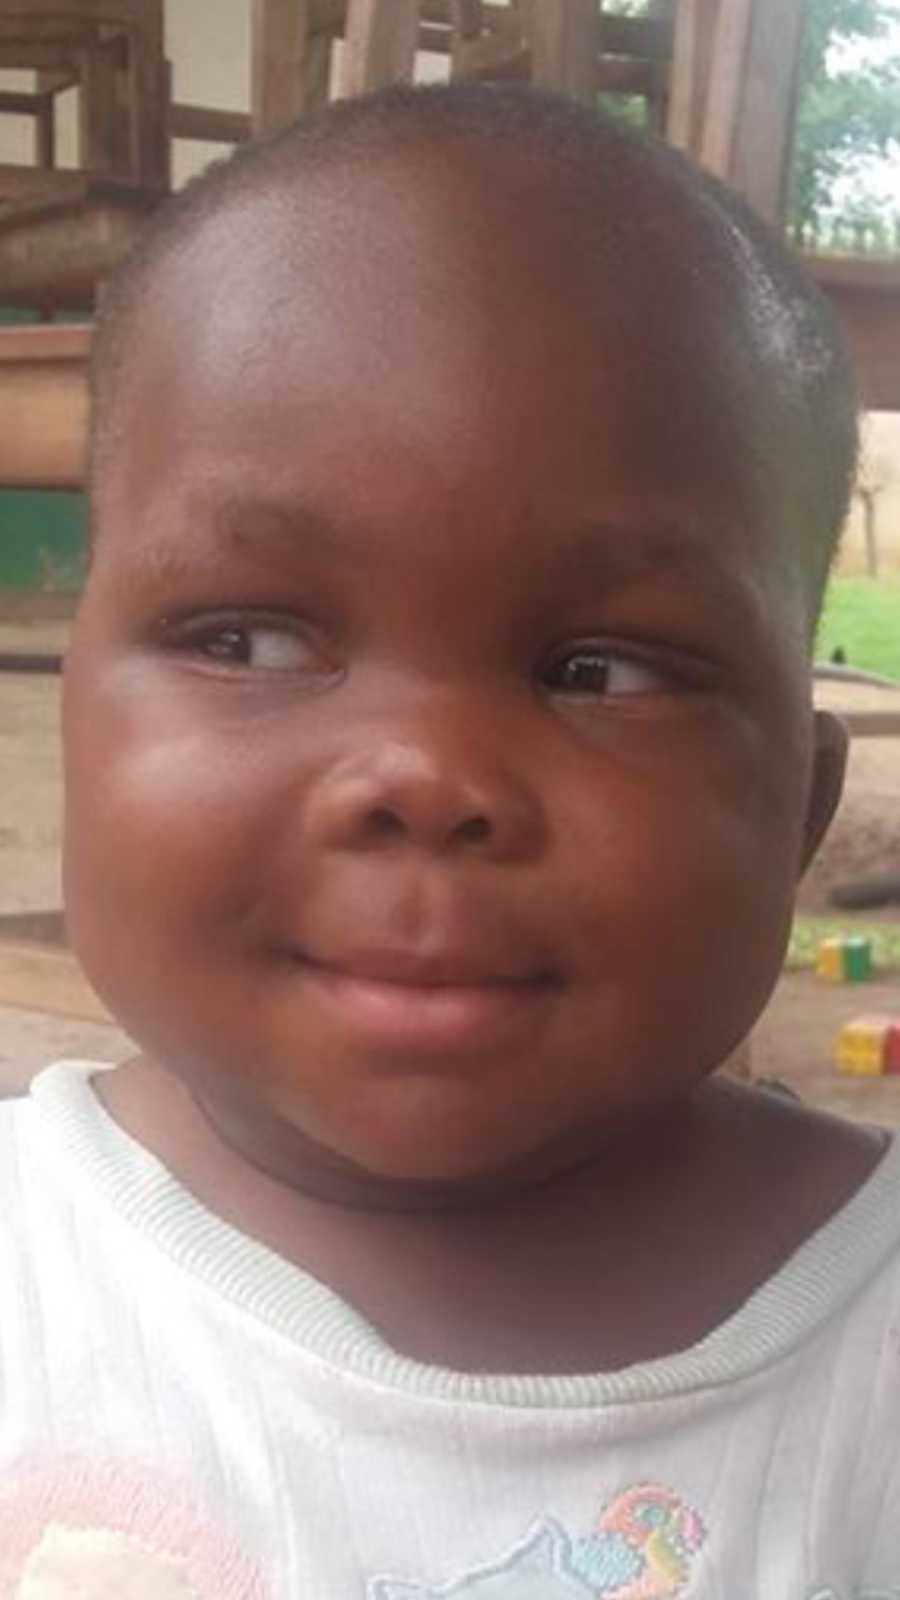 Toddler orphan from African smiling as her eyes look to the side